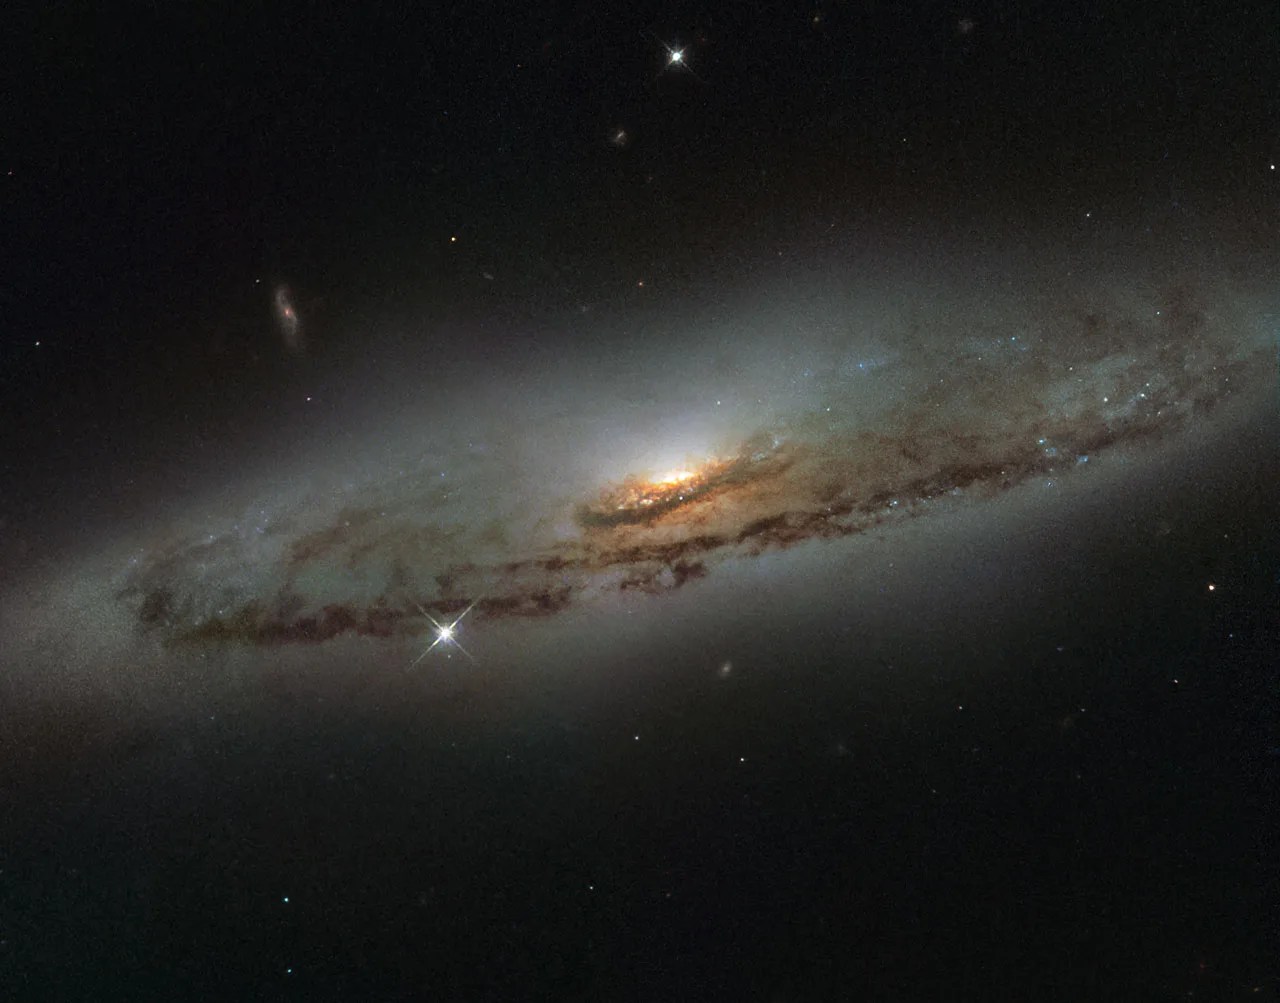 Image of spiral galaxy ngc 4845, a flat and dust-mottled reddish-brown disk surrounding a bright orange galactic bulge.